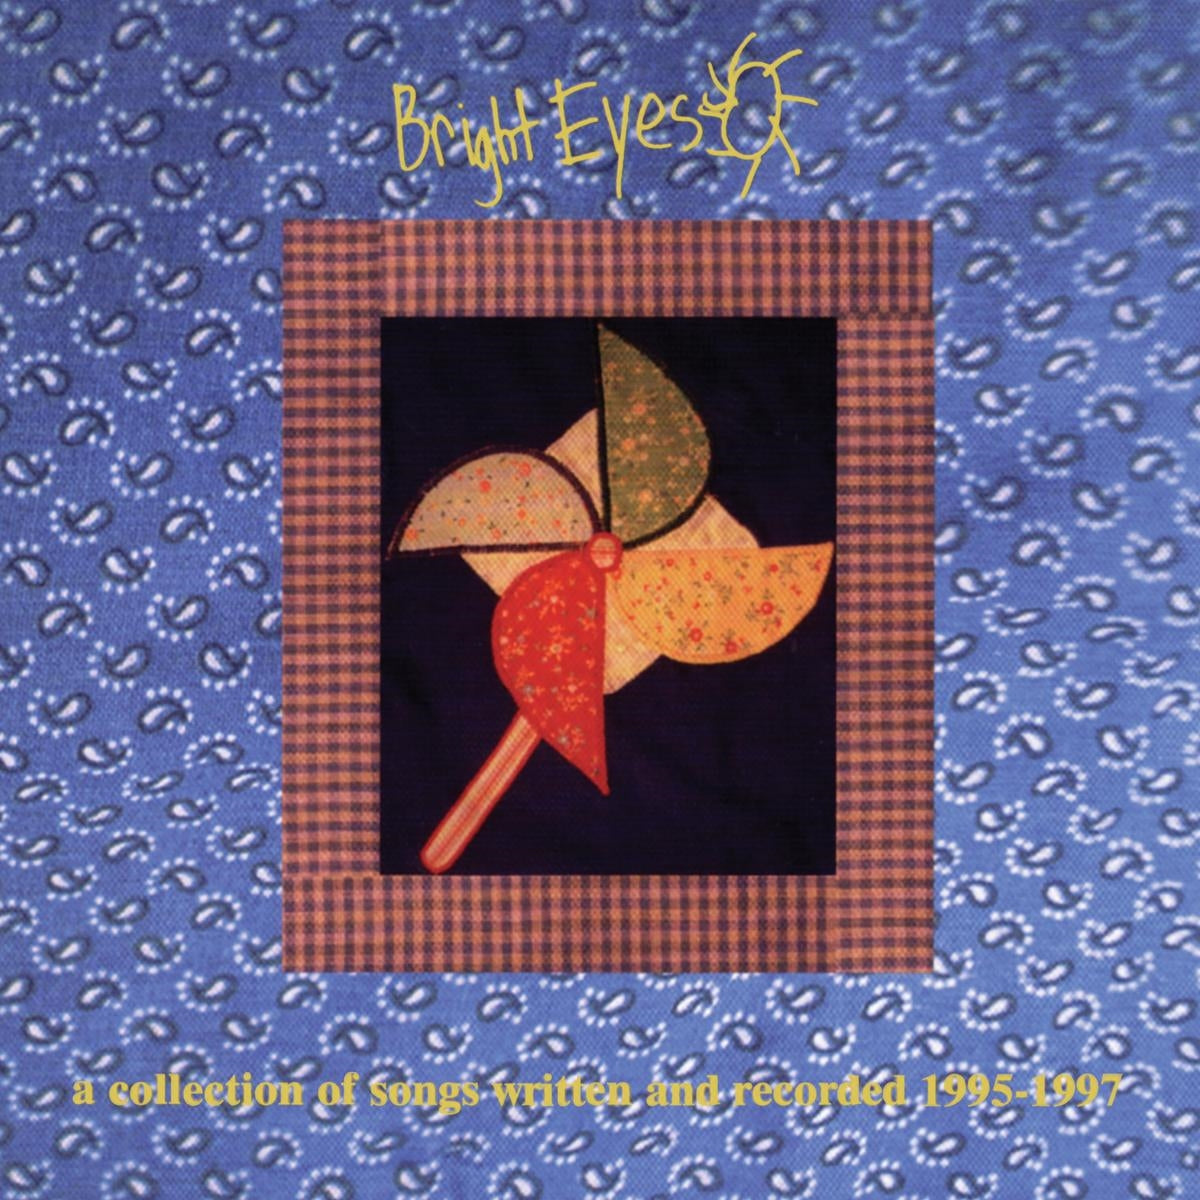 BRIGHT EYES - A COLLECTION OF SONGS WRITTEN AND RECORDED 1995-1997 Vinyl 2xLP